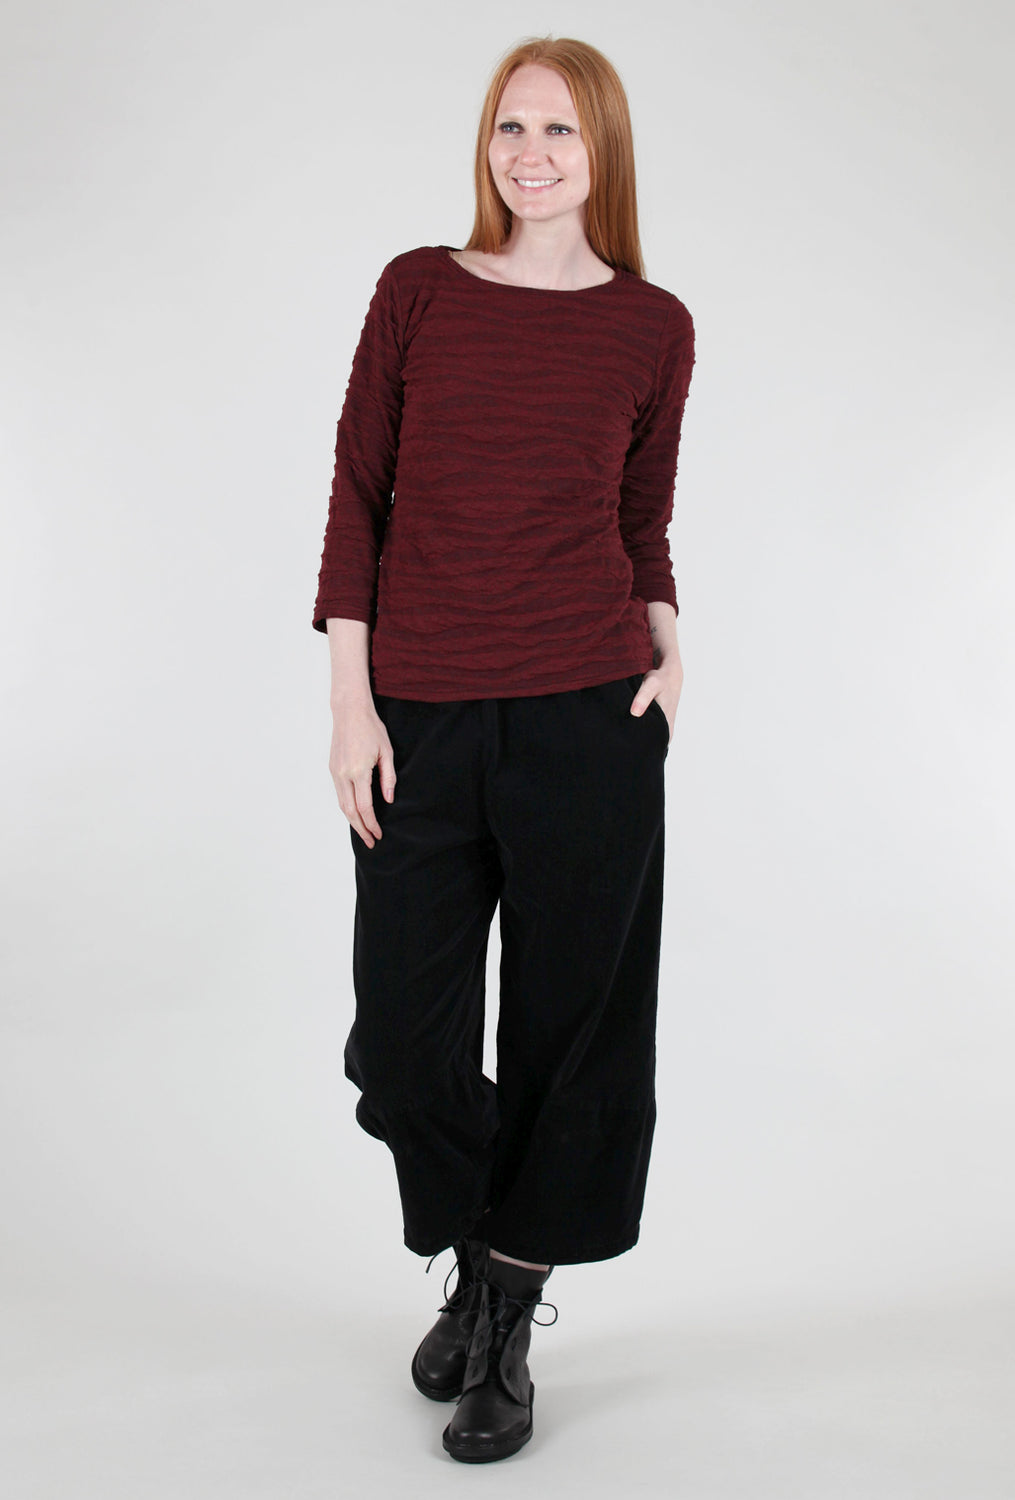 3/4-Sleeve Boatneck Wave Top, Holiday Red